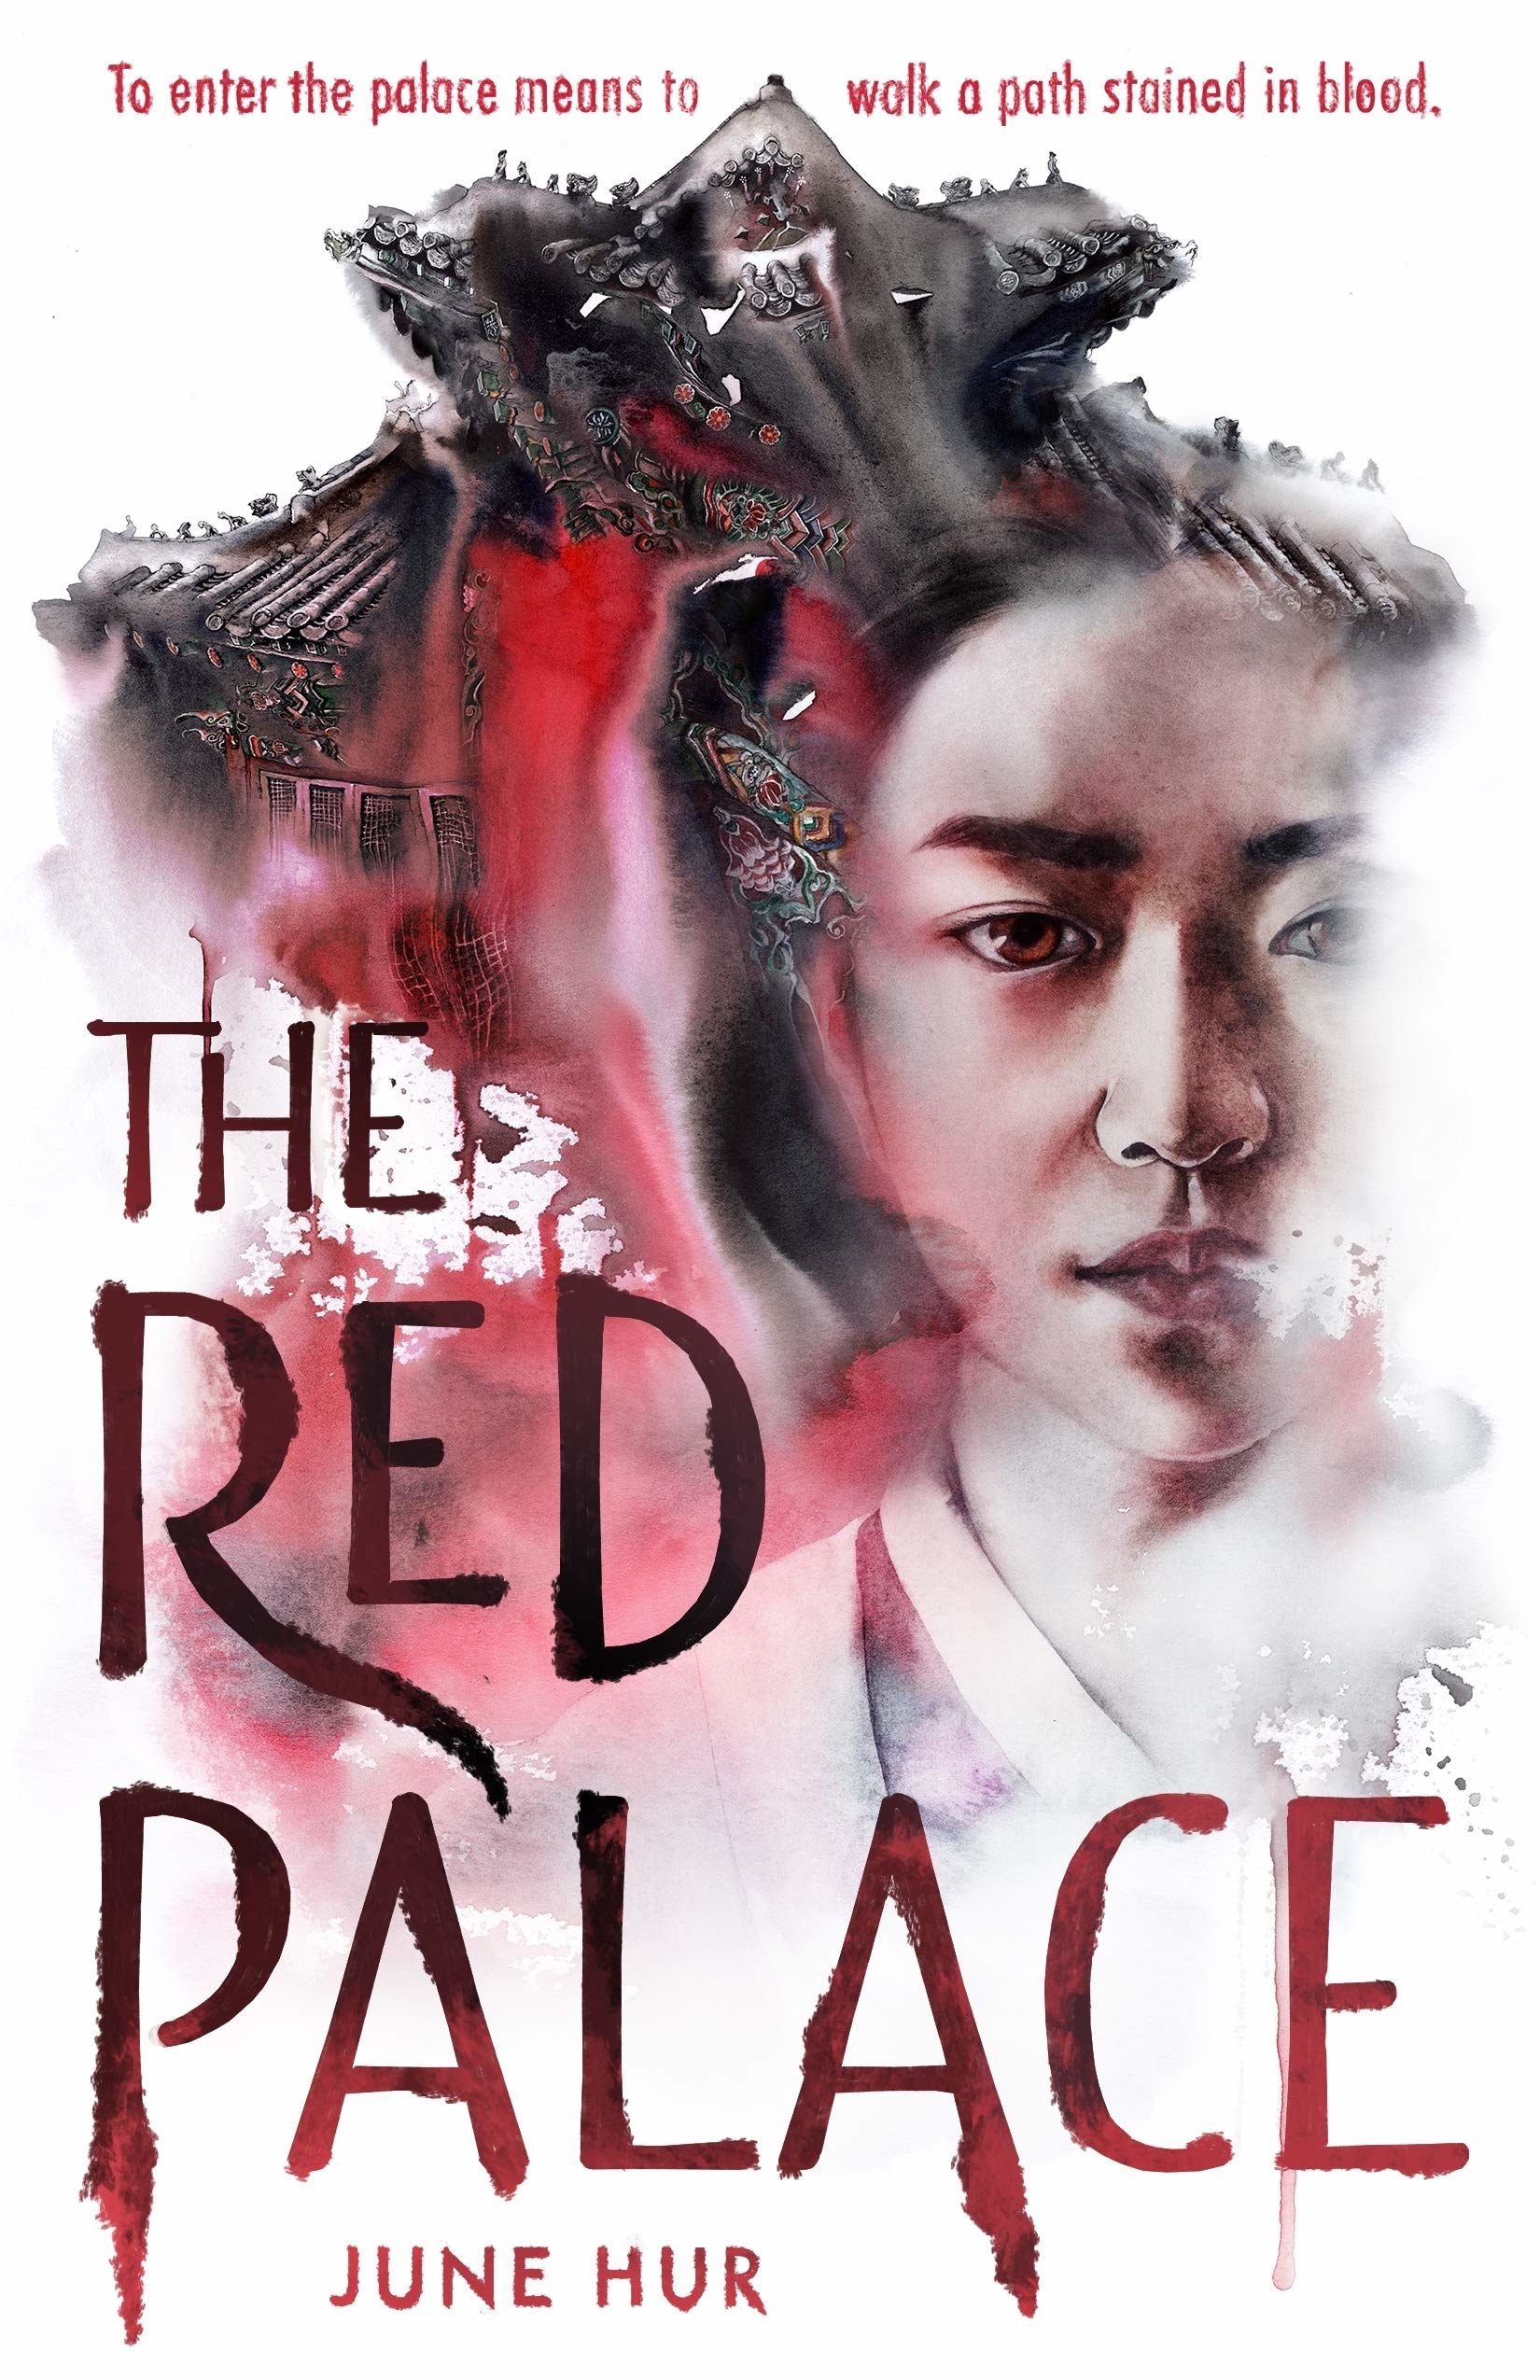 Cover for Jane Hur's 'The Red Palace'